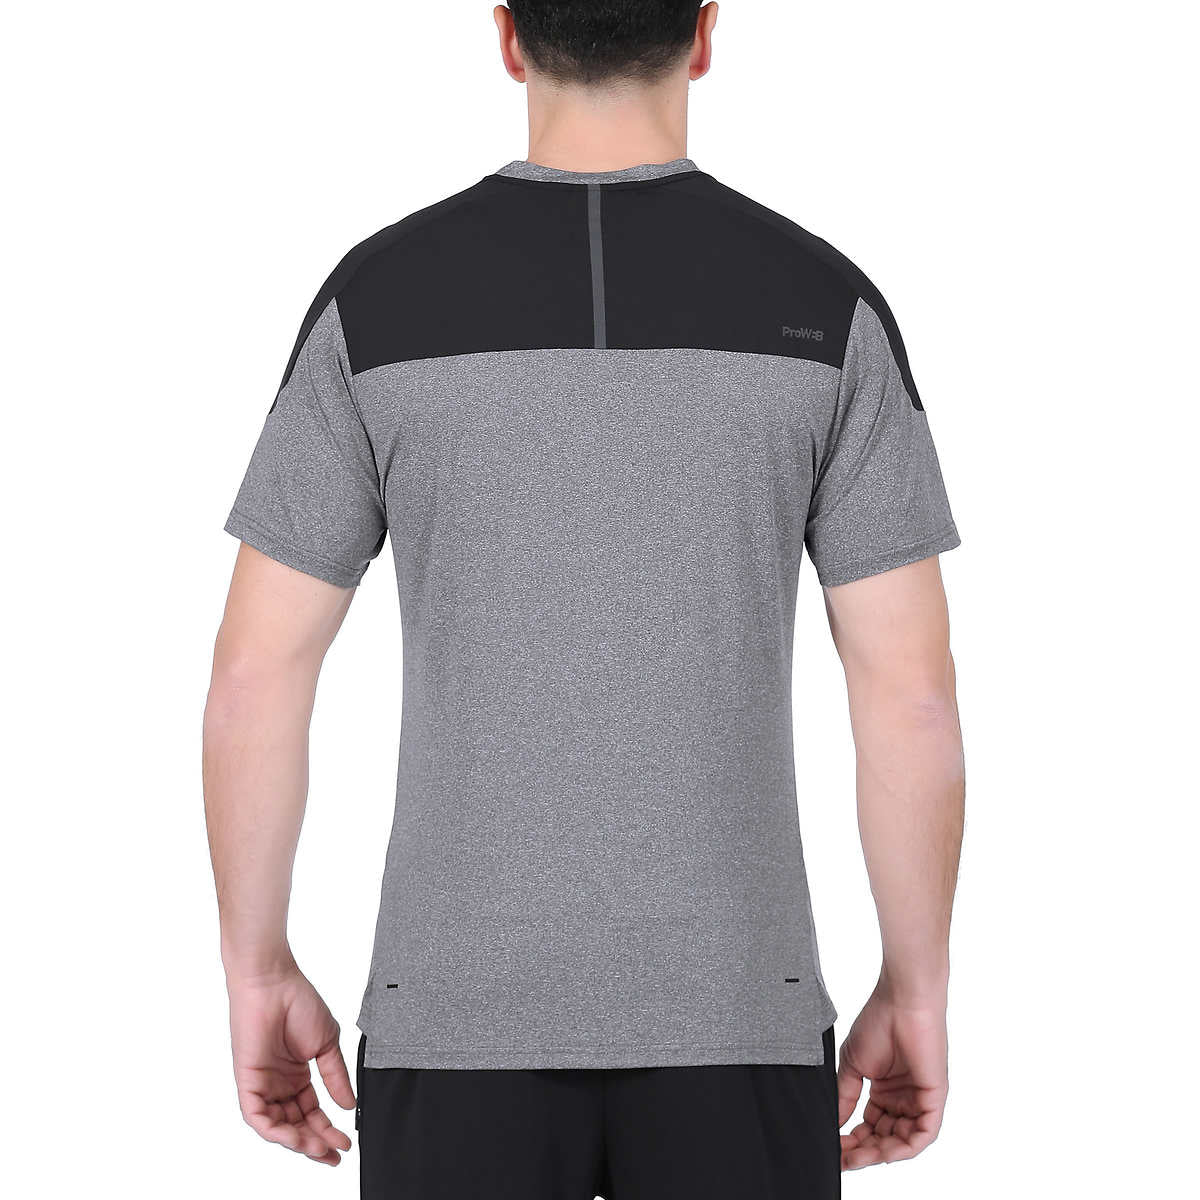 Spyder Men's Active Short Sleeve Tee Moisture Wicking 4 Way Stretch T-Shirt-Gray / L, Size: Large